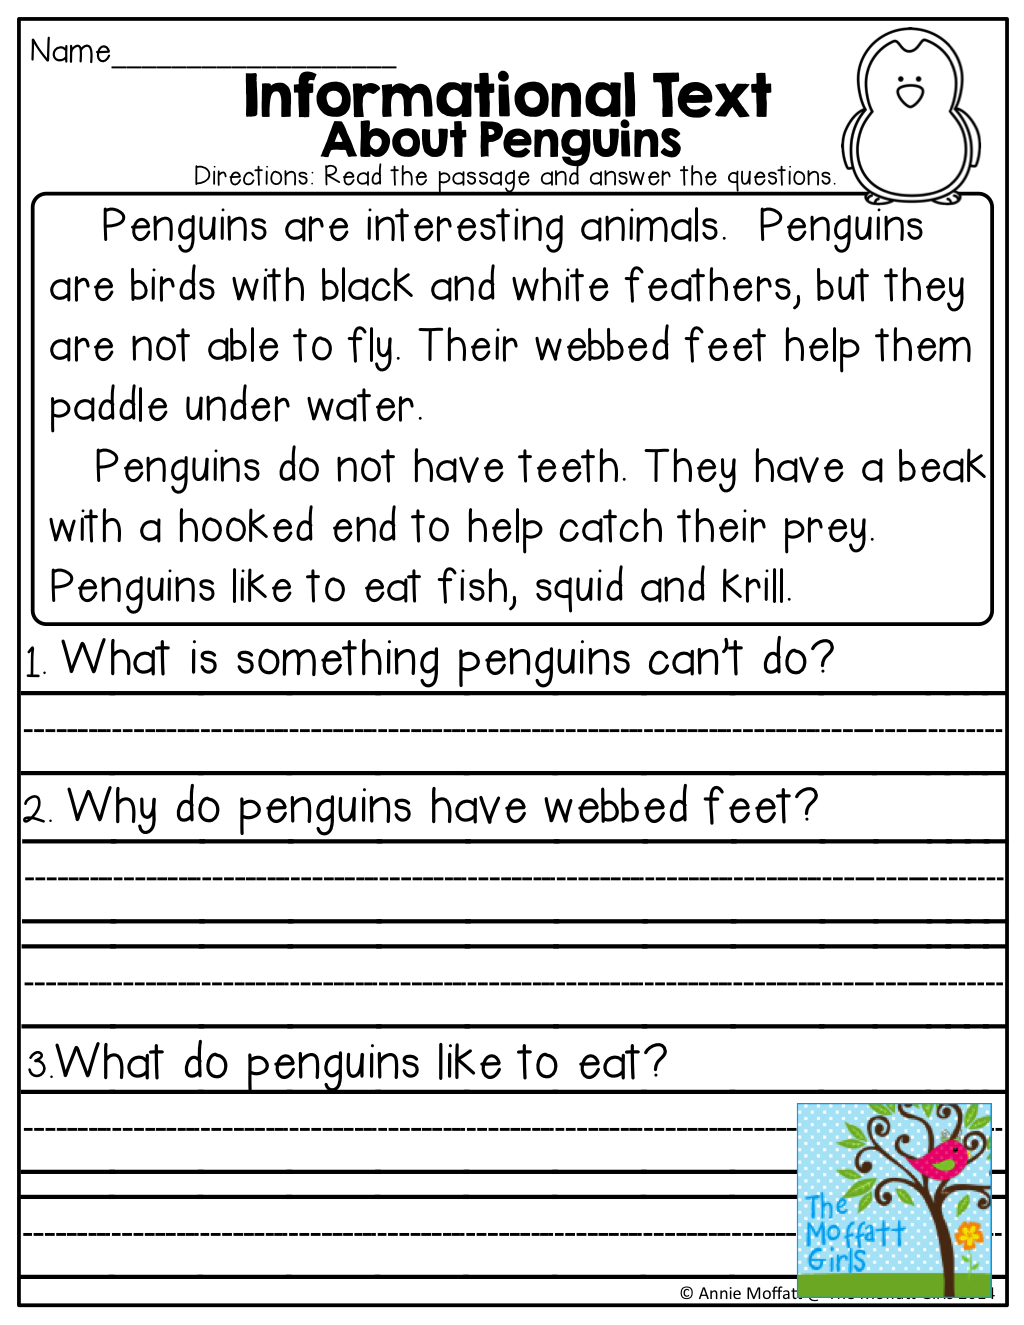 Informational Text About Penguins And TONS Of Other Great Printables 